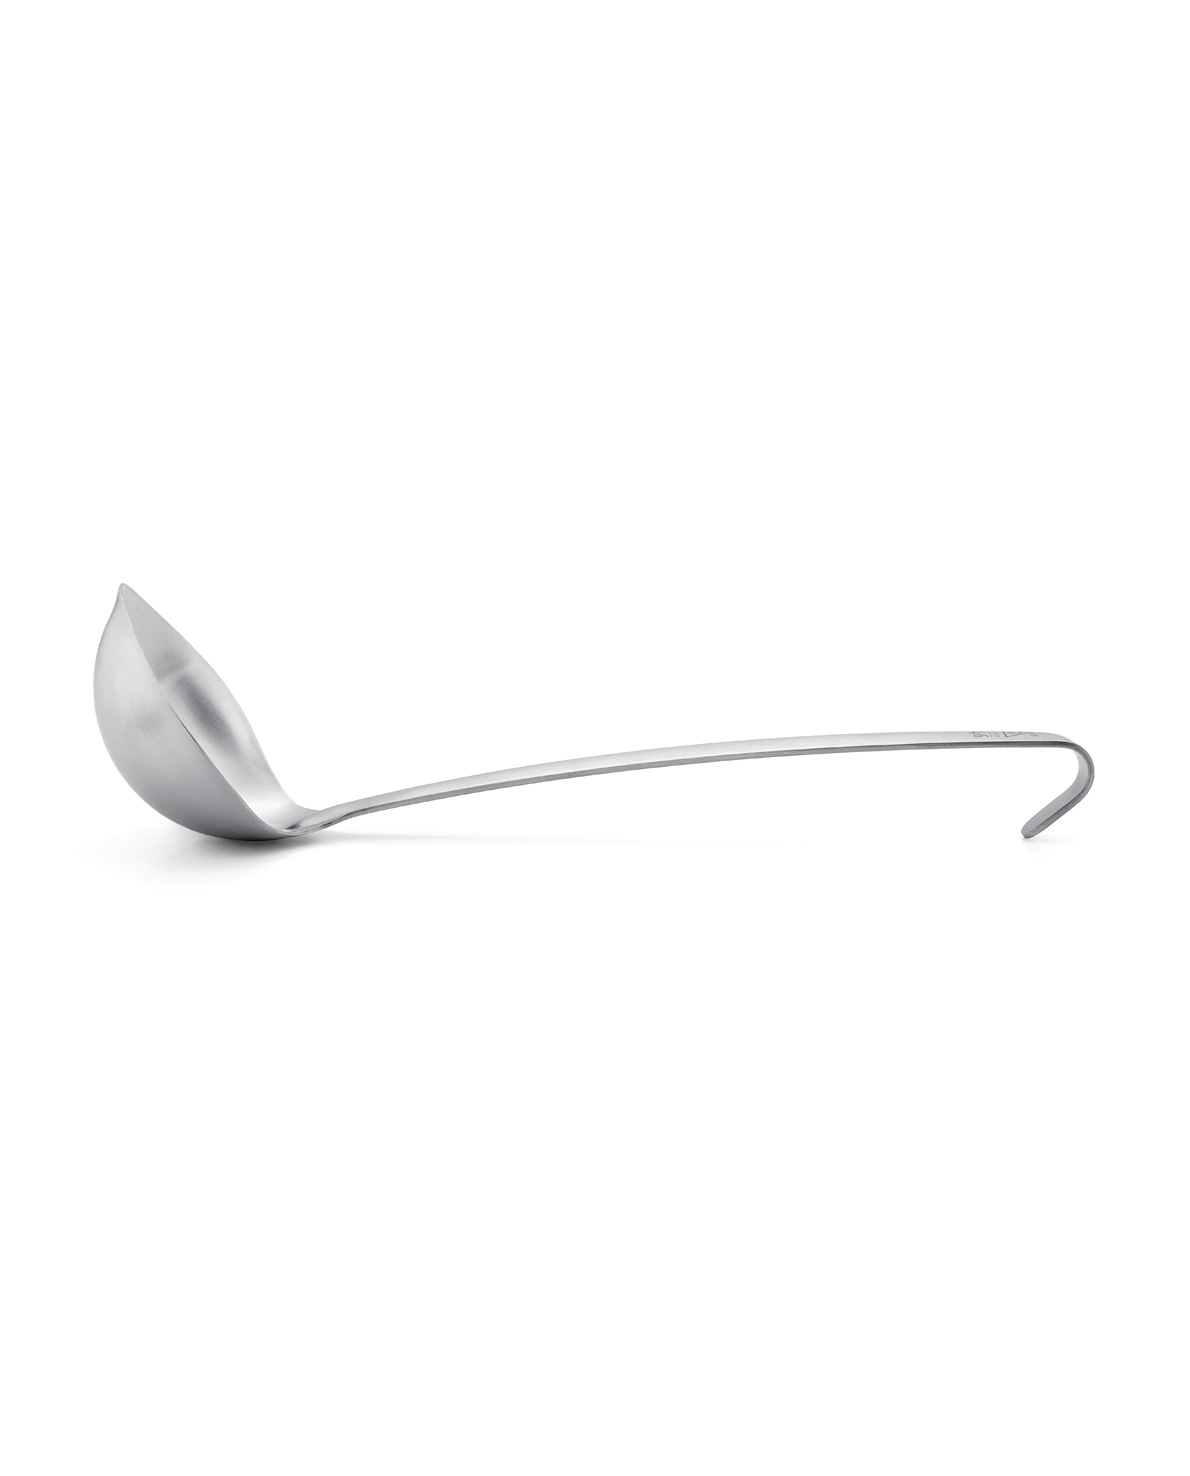 triangle Soup Ladle series 1946 18/10 stainless steel